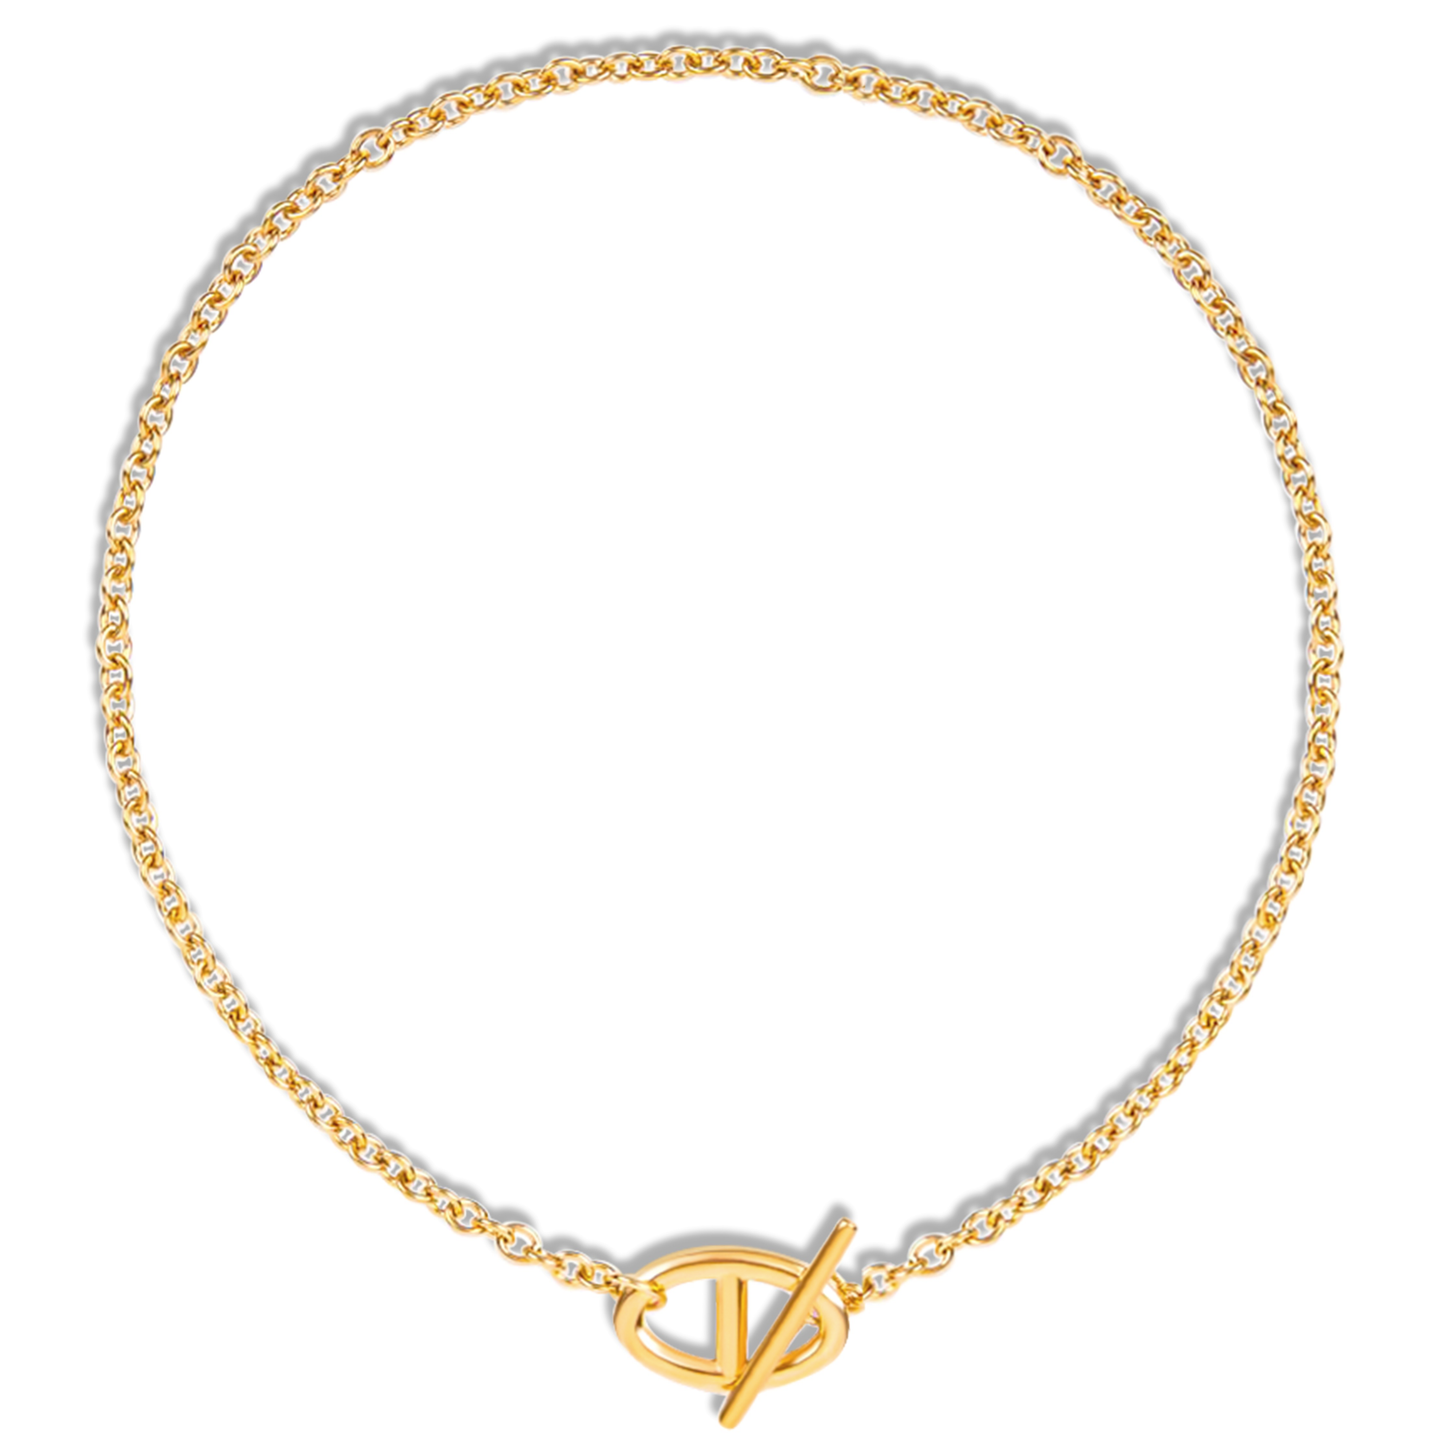 Ellie Vail - Raya Anchor Toggle Chain Necklace